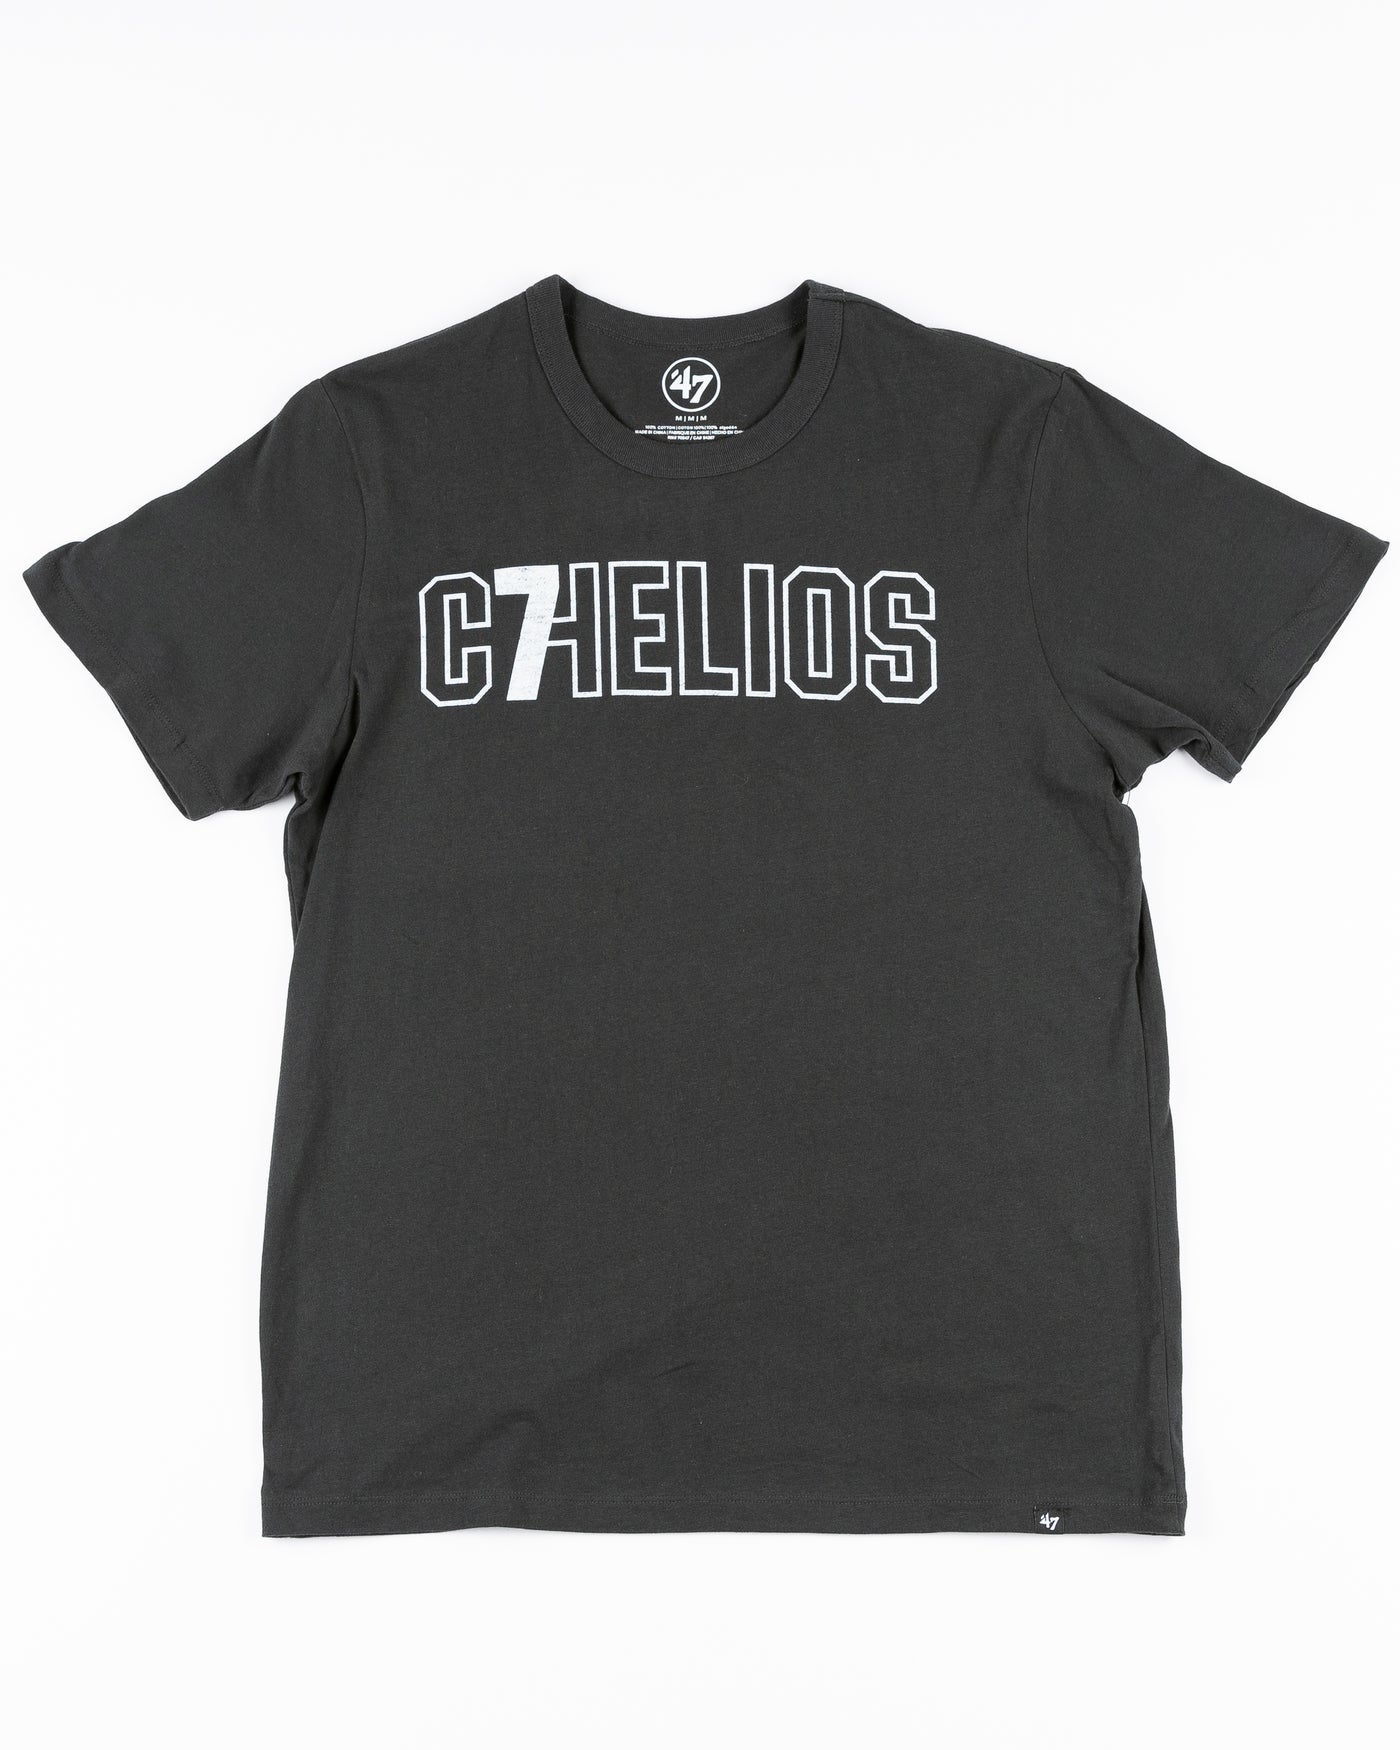 black '47 brand tee with Chelios retirement logo on front and Chicago Blackhawks banner on back yoke - front lay flat